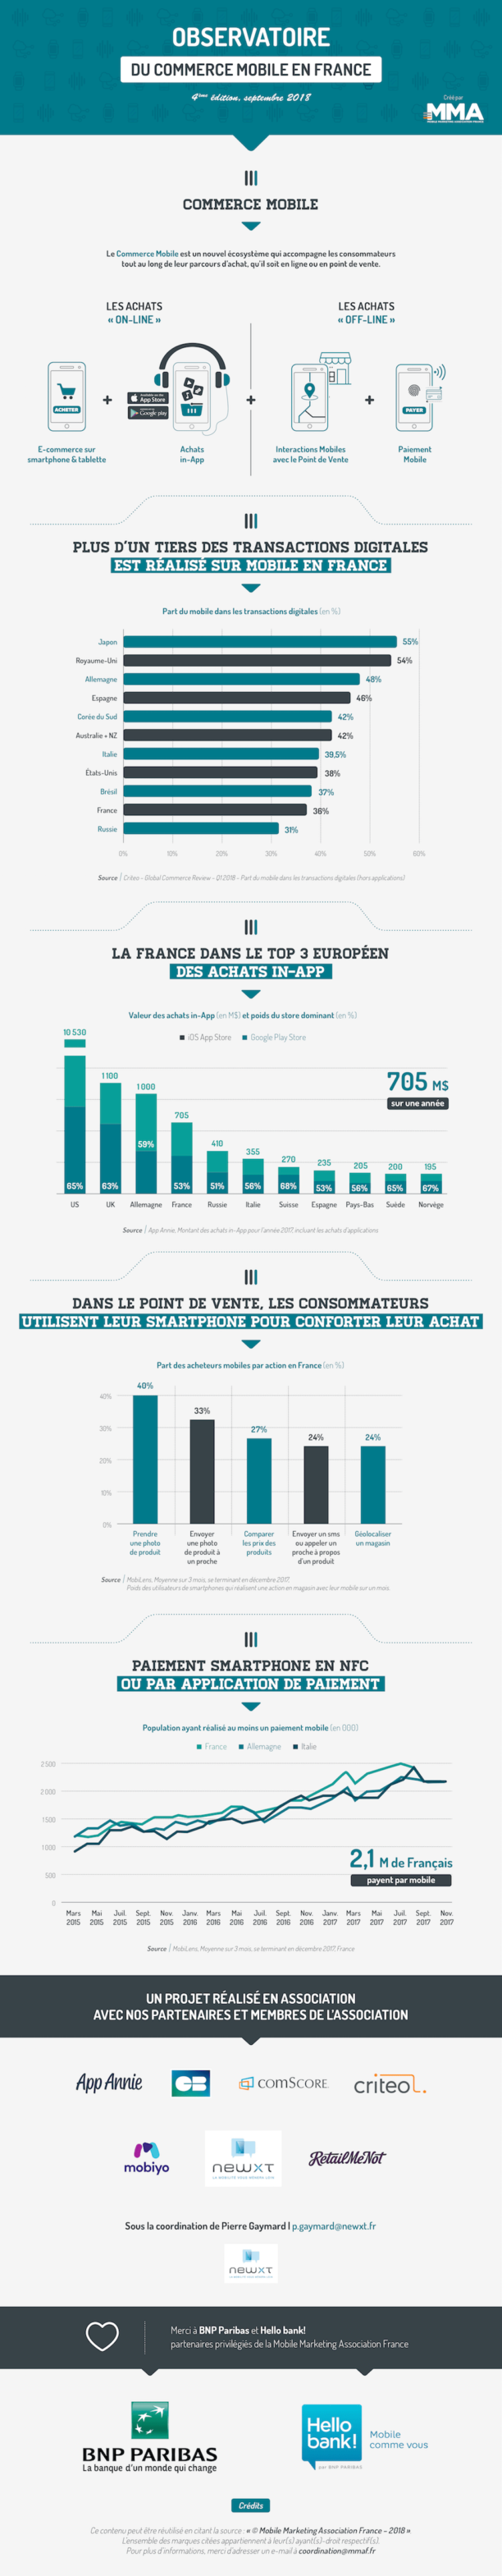 infographie-mobile